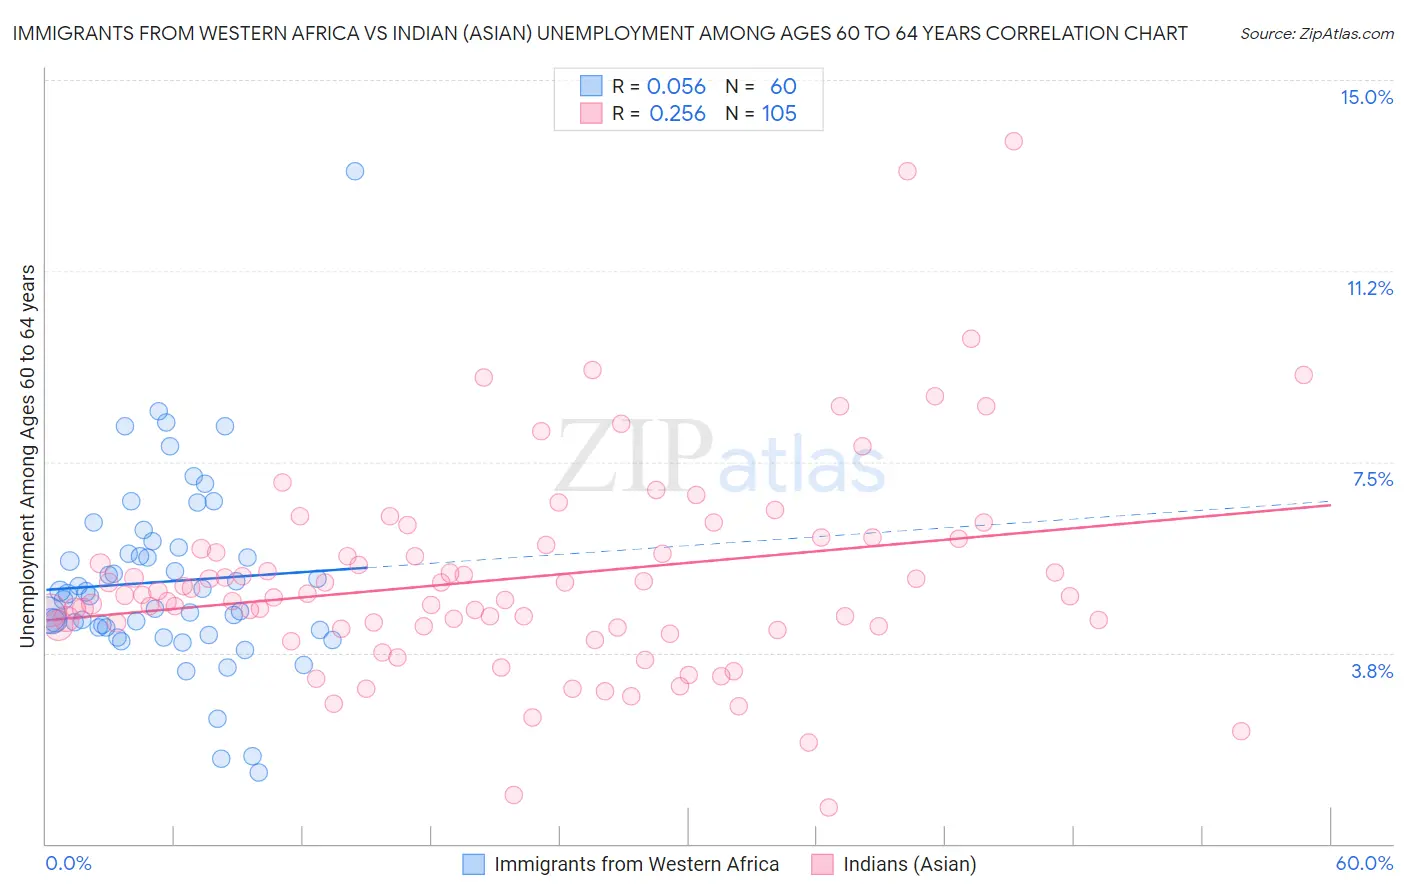 Immigrants from Western Africa vs Indian (Asian) Unemployment Among Ages 60 to 64 years